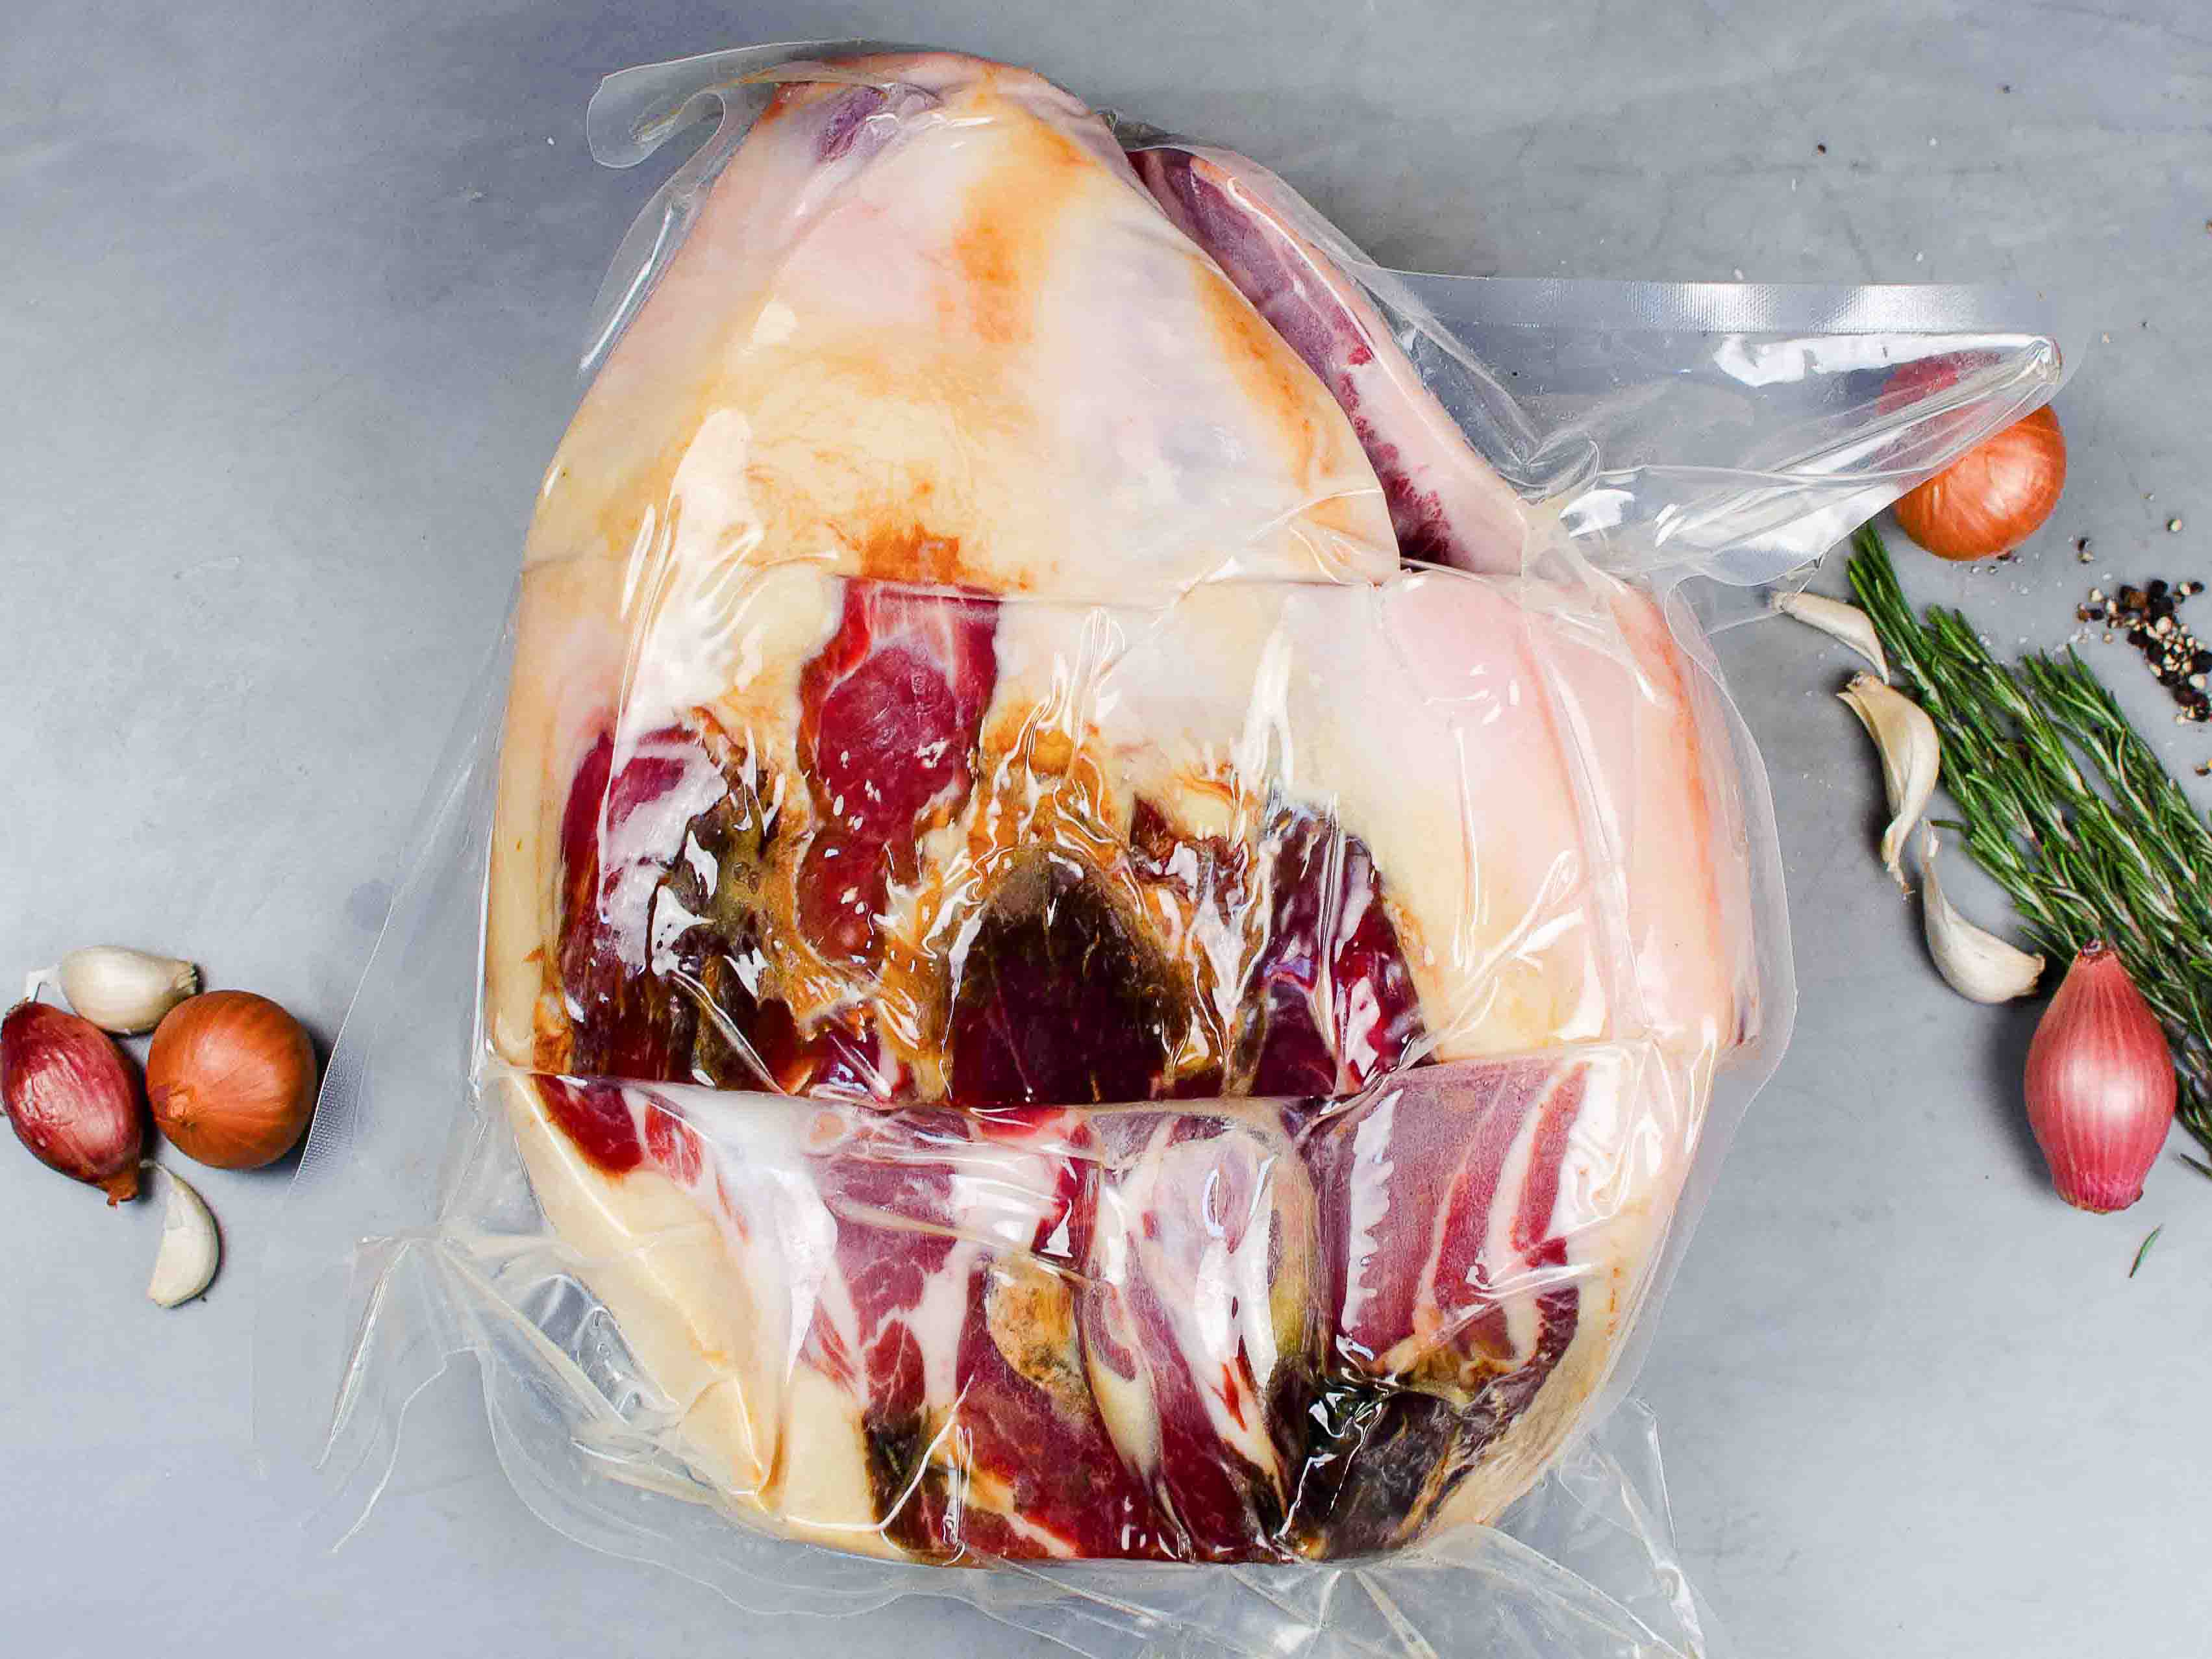 BROADBENT'S HERITAGE DRY CURED COUNTRY HAM